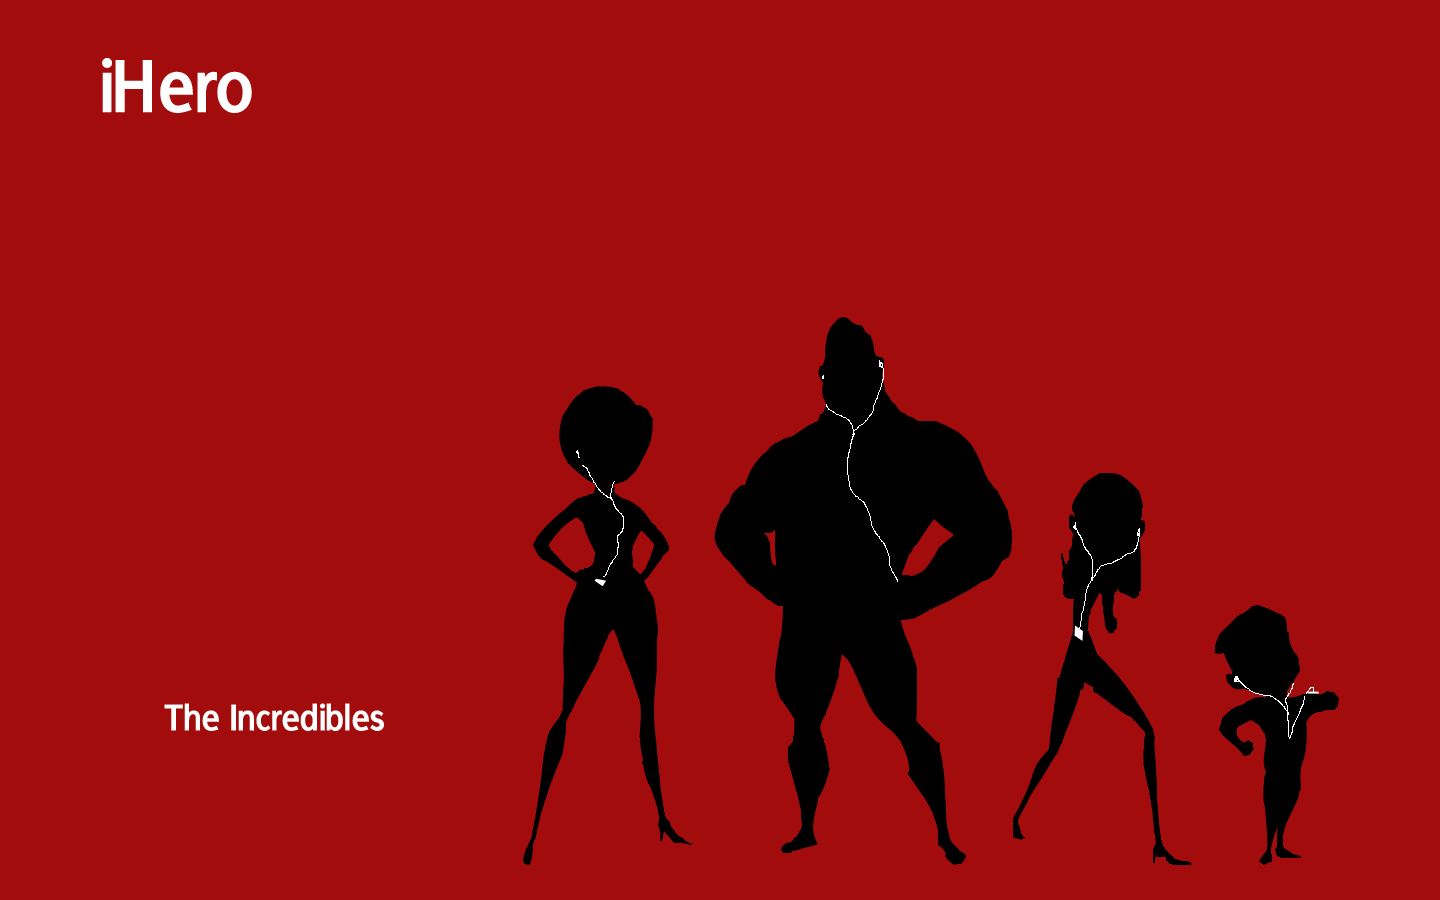 Windows Wallpaper Background The Incredibles Ipod Style